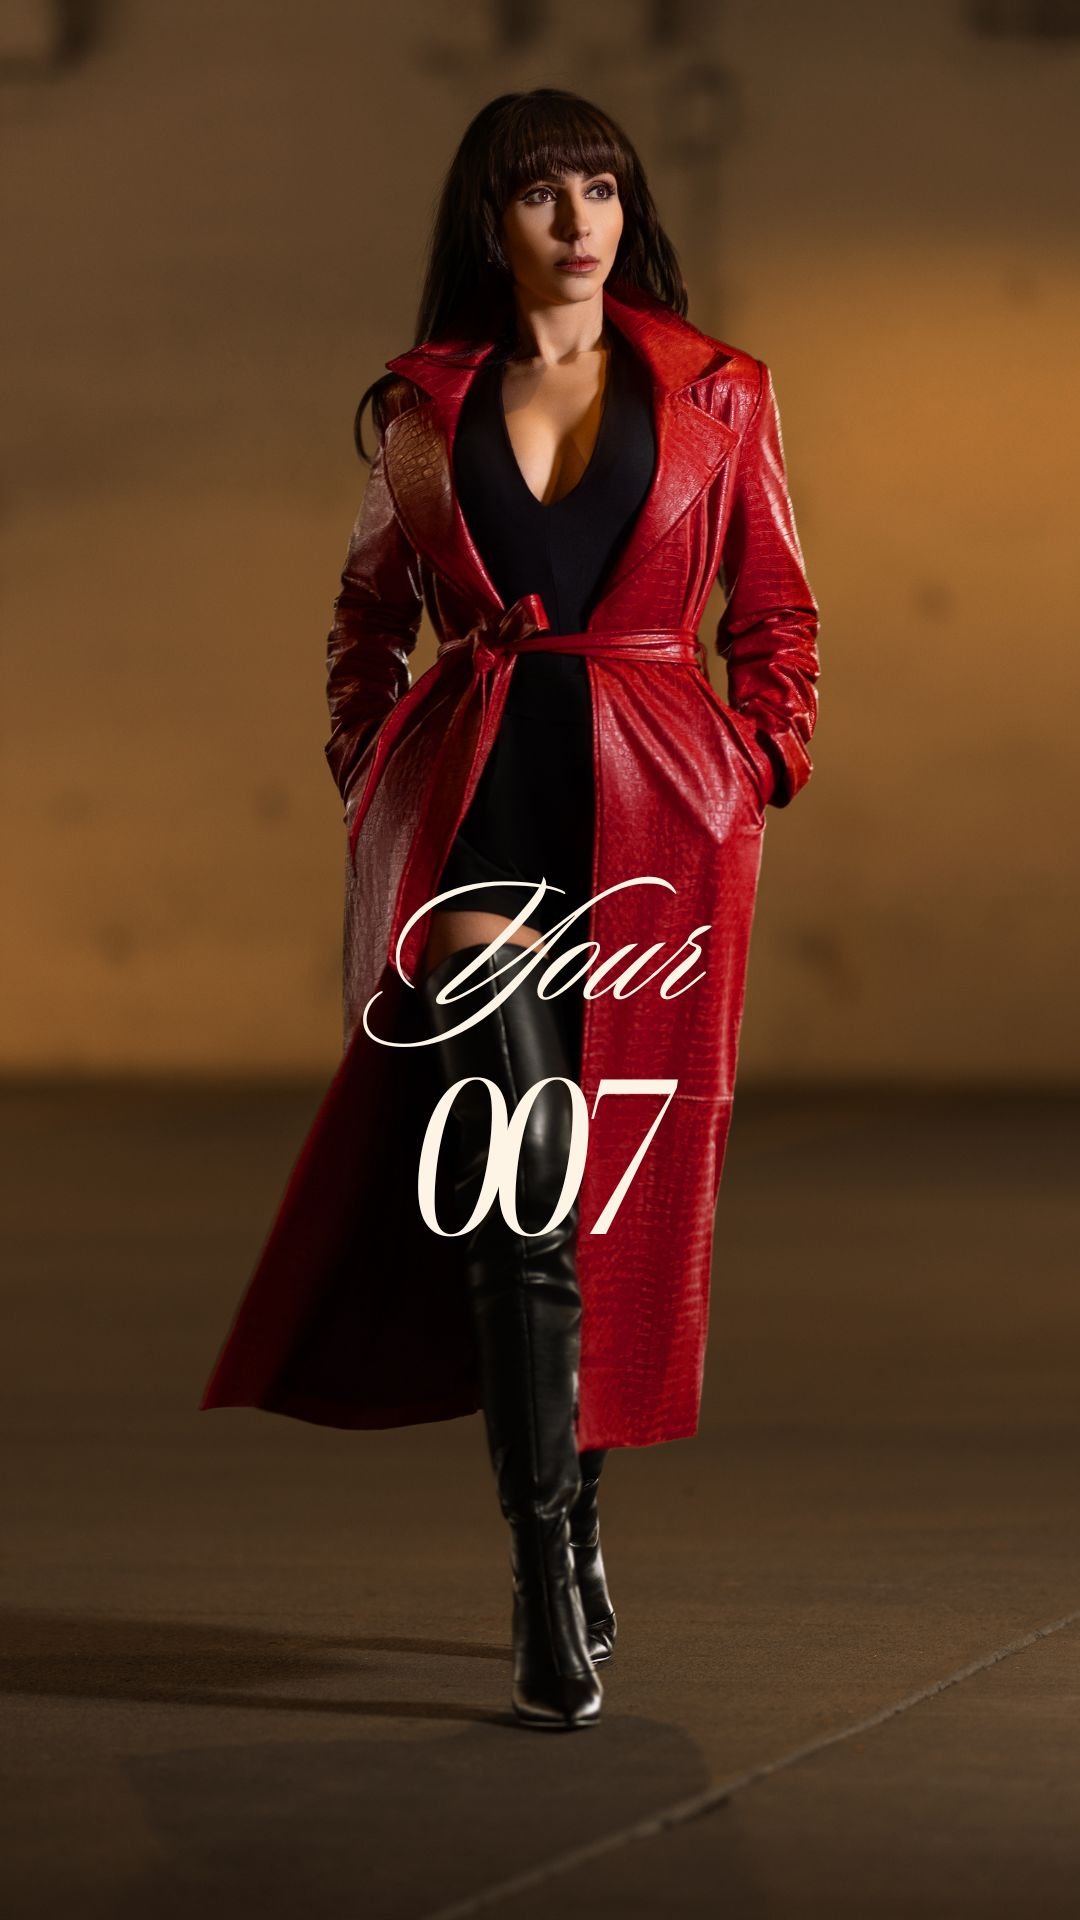 Channel your inner spy with our 'Hour 007' fashion series. Captured here is a model exuding mystery and allure, dressed in a striking red leather trench coat, cinched at the waist with a black belt, and paired with sleek knee-high boots. She stands poised against a moody backdrop, embodying the enigmatic charm of a fashion-forward secret agent